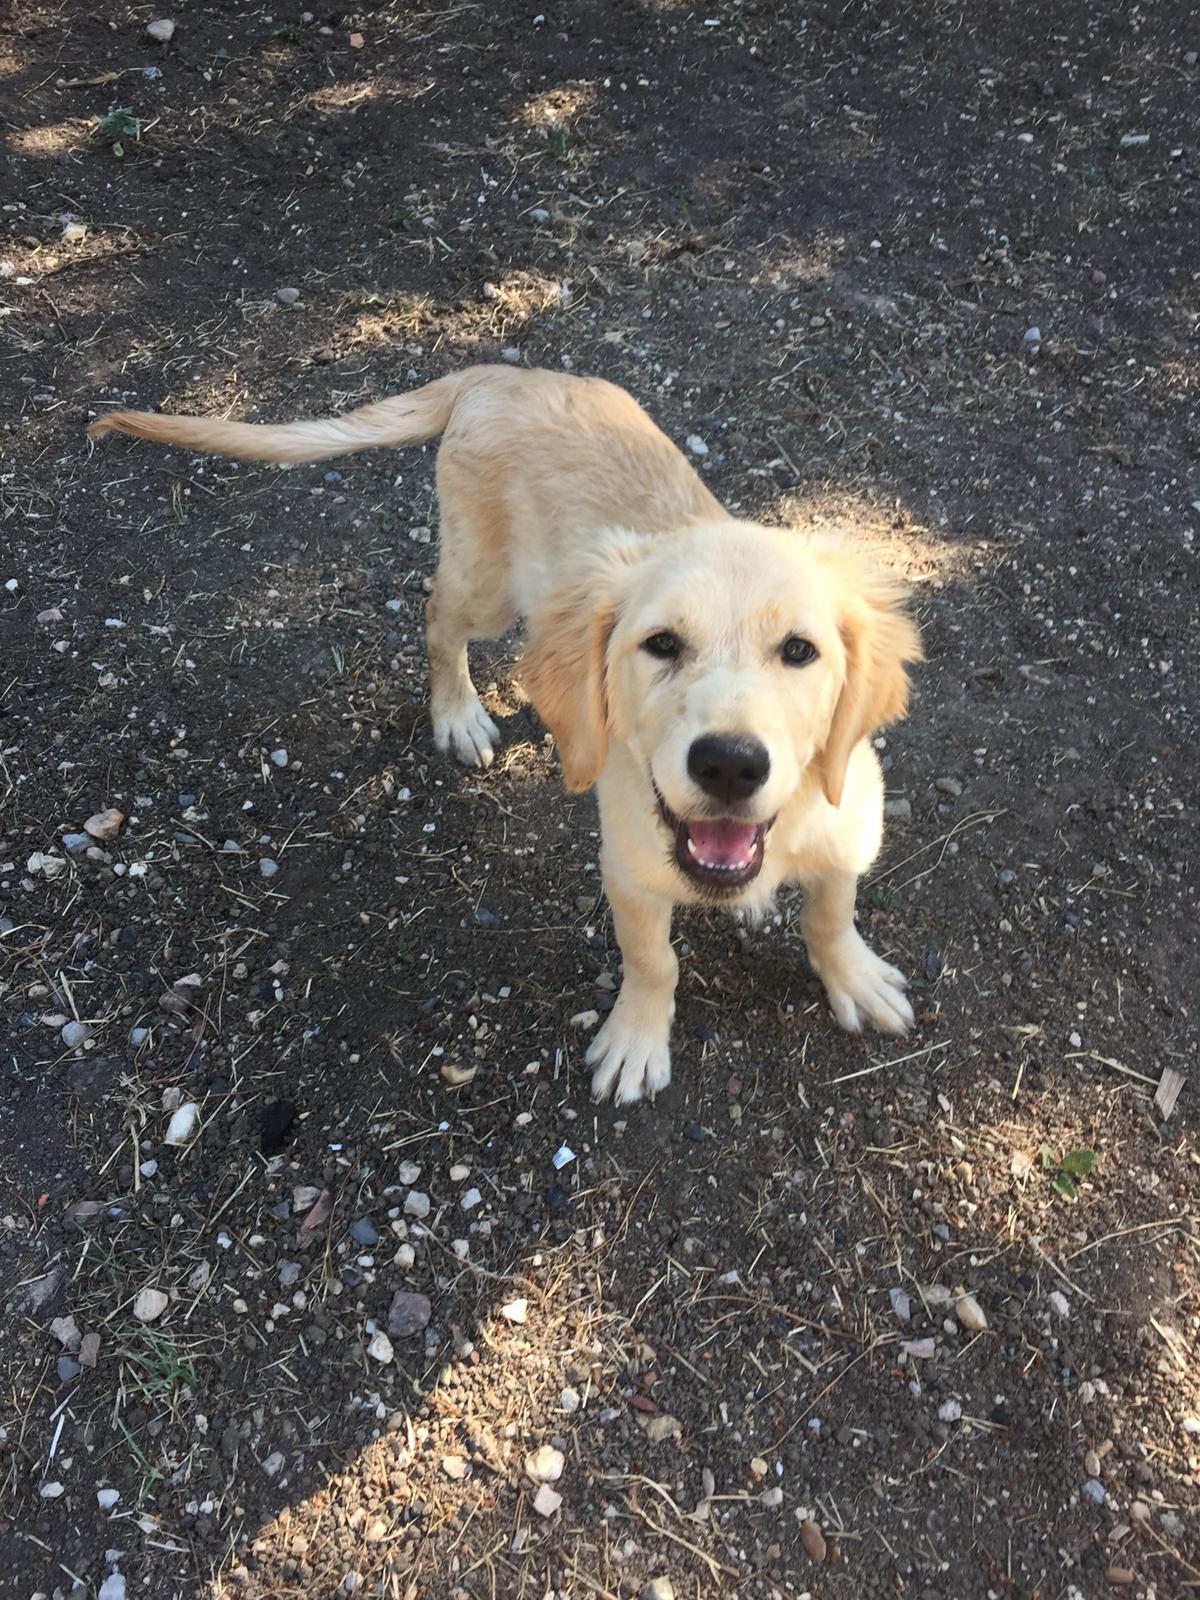 Punkin 10 Months Old Female Adopted 11 5 19 Golden Retriever Rescue